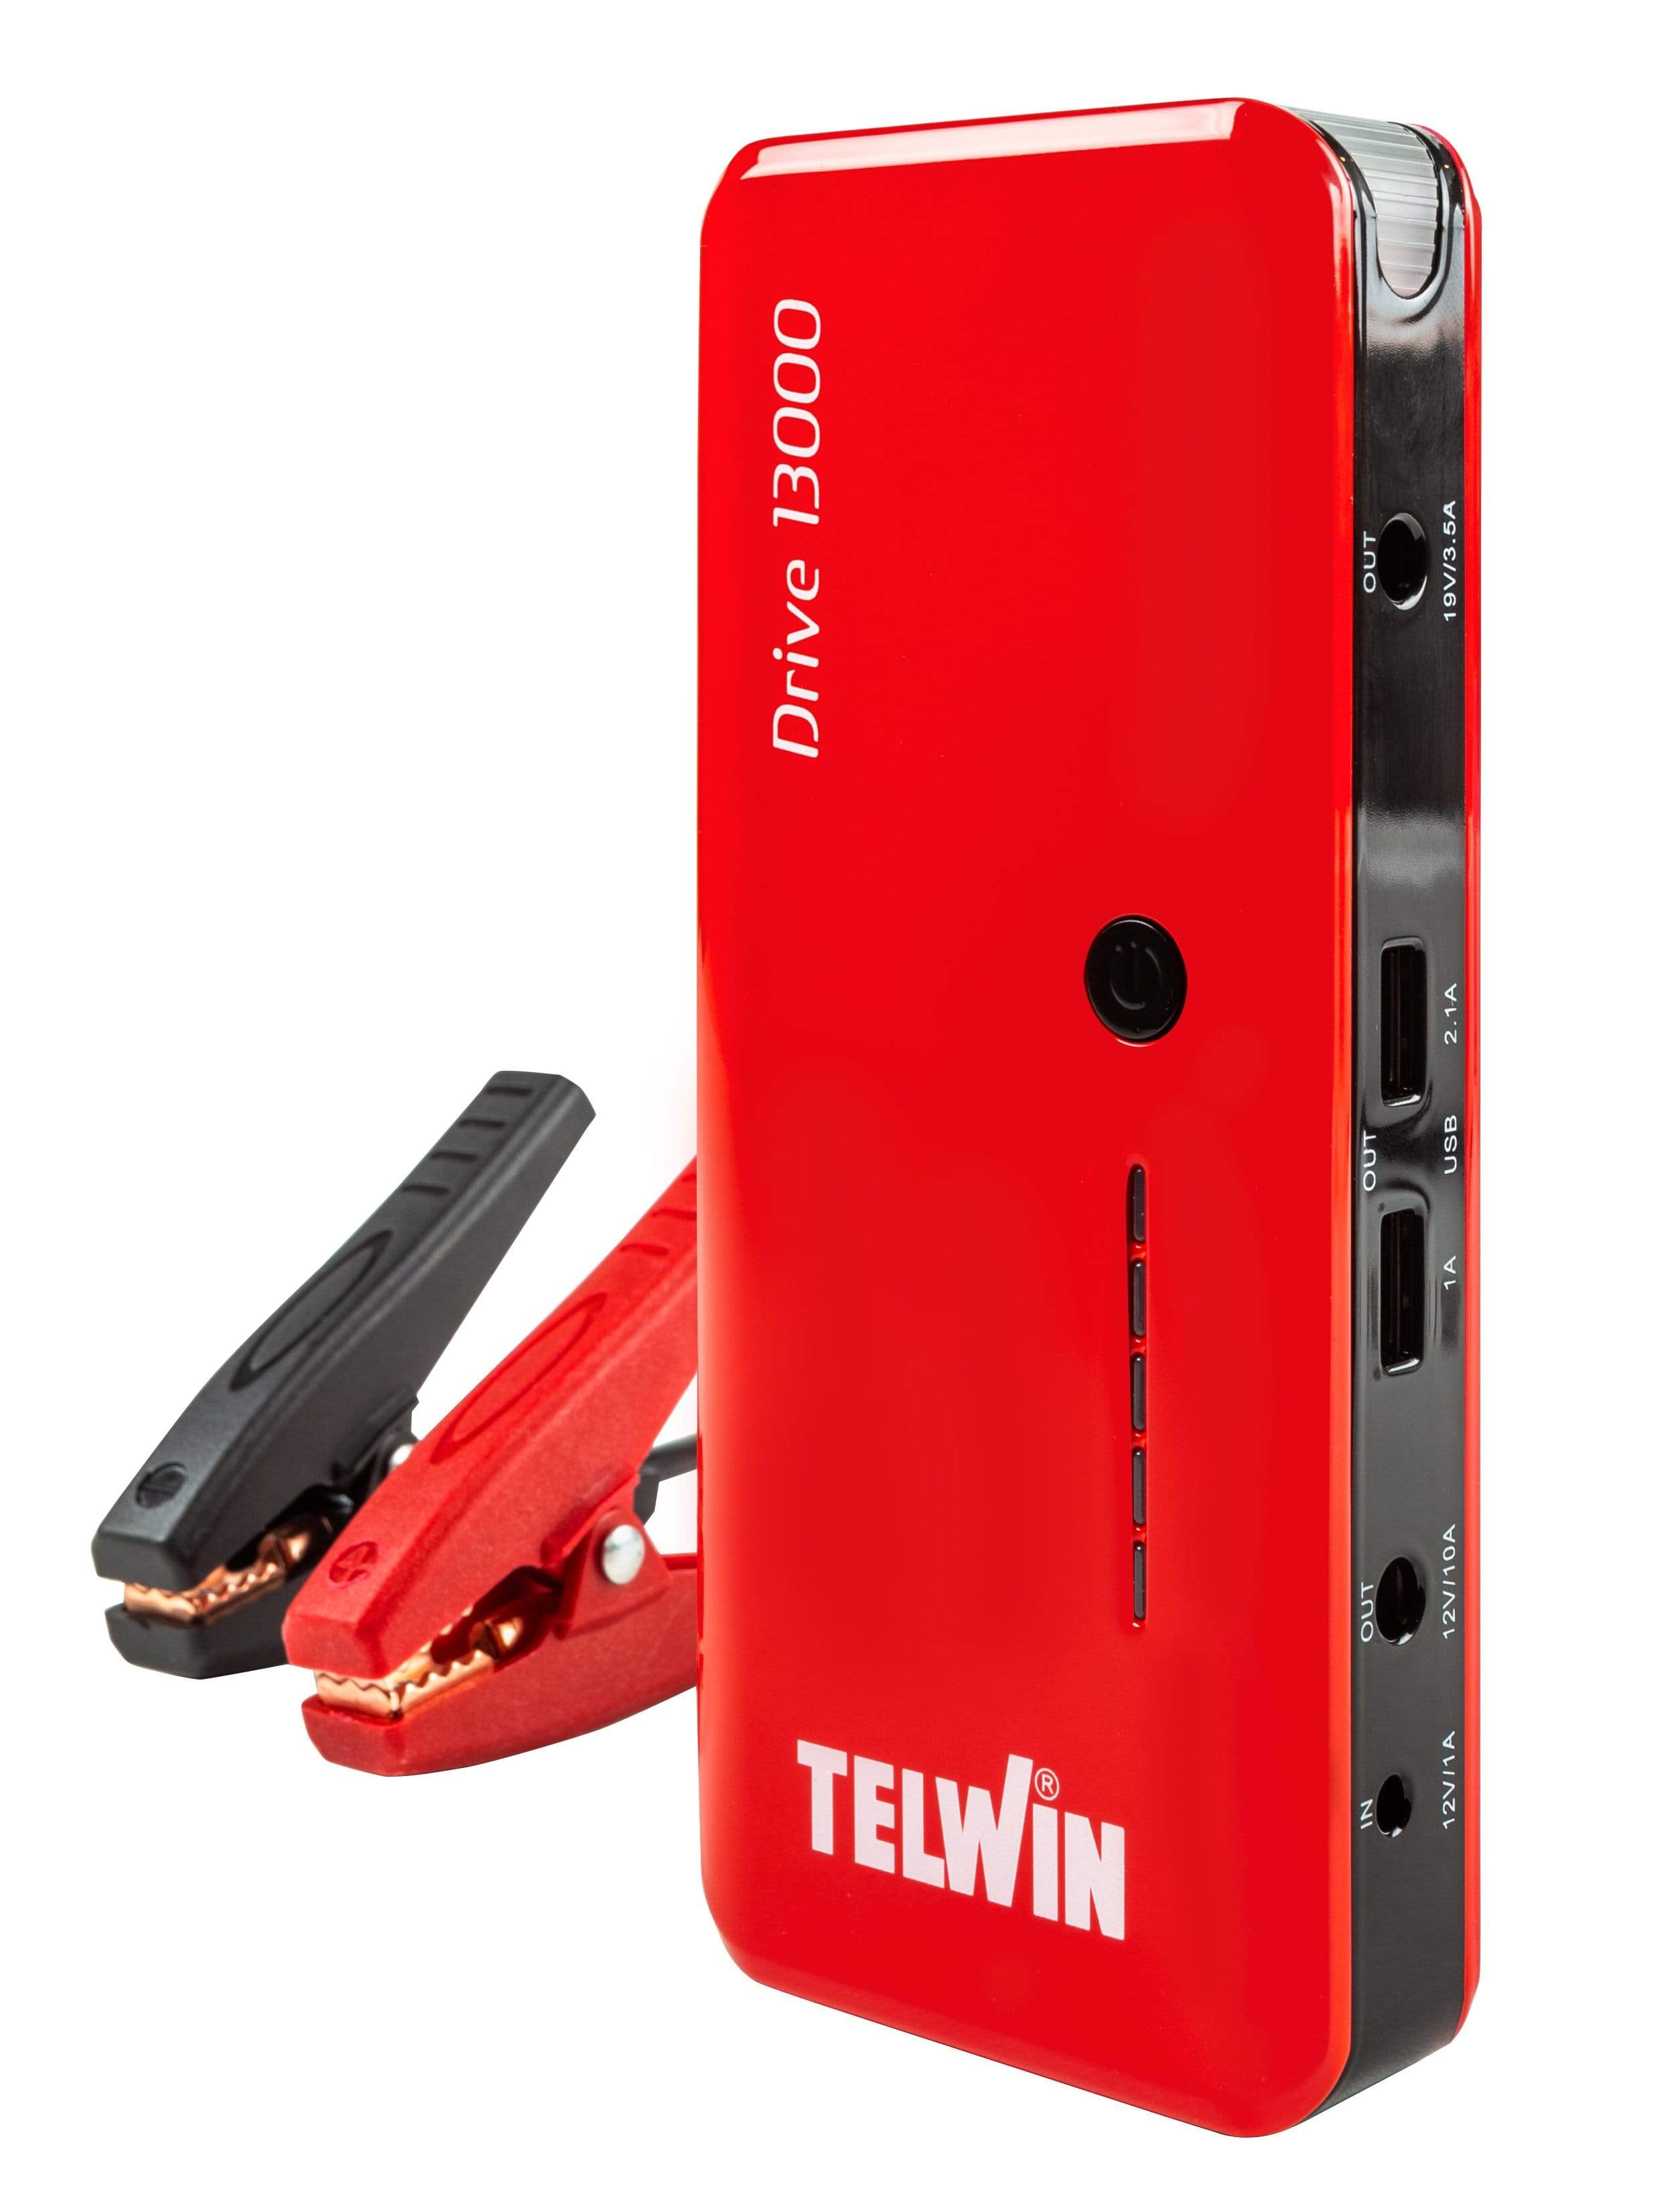 Telwin Battery Charger 12V - DRIVE 13000 | Supply Master | Accra, Ghana Tools Building Steel Engineering Hardware tool